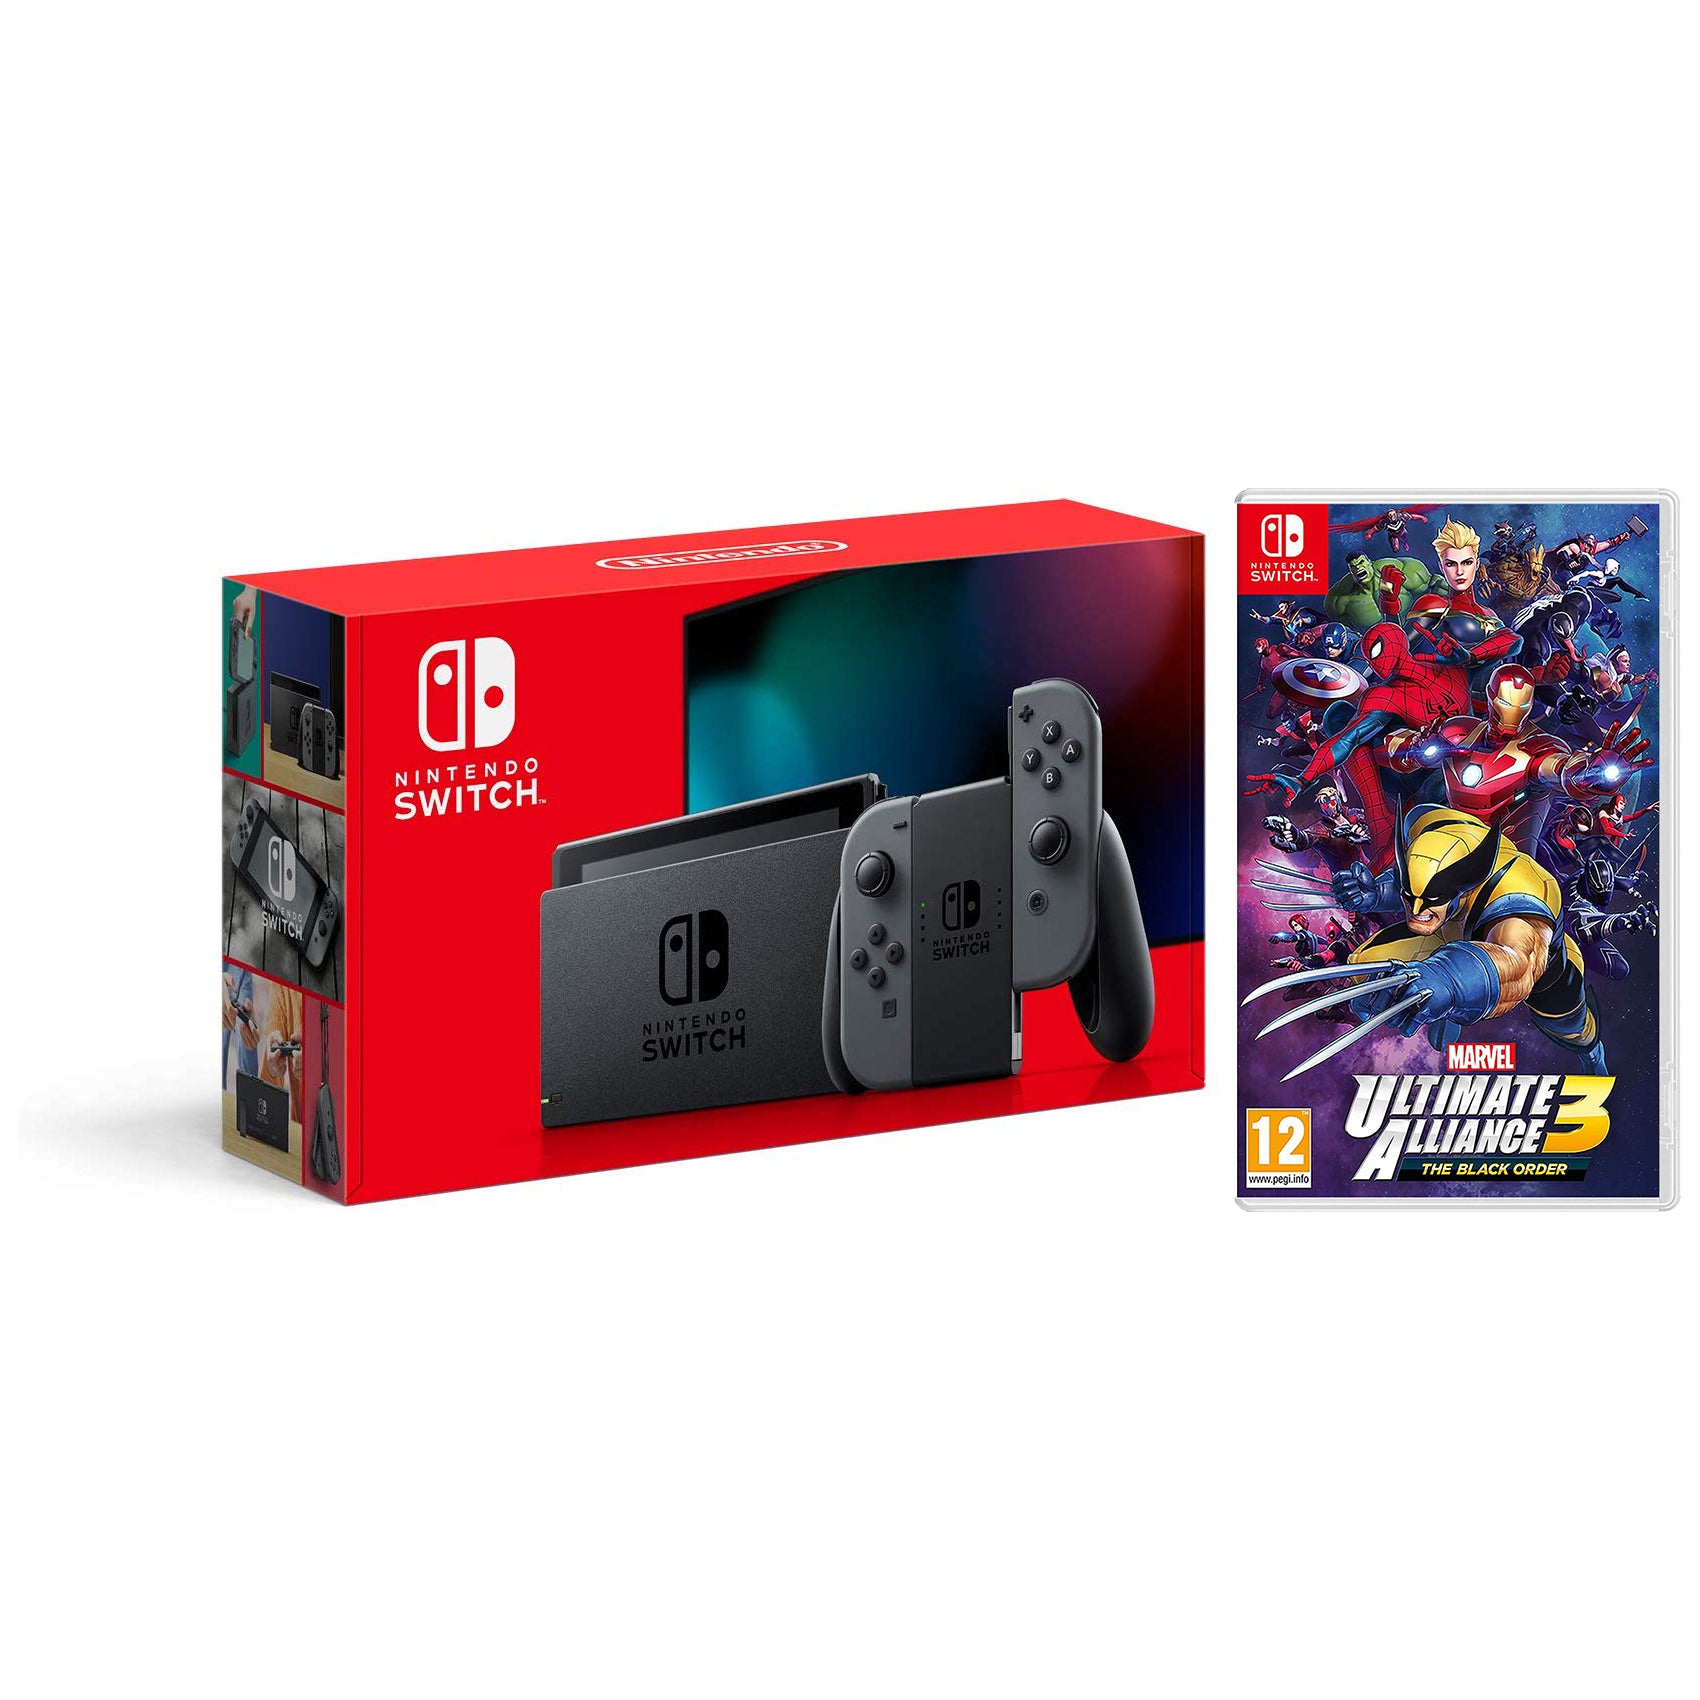 Nintendo Switch 32GB Console - Gray Joy-Con - New Version with Marvel Ultimate Alliance 3: The Black Order - Pro-Distributing